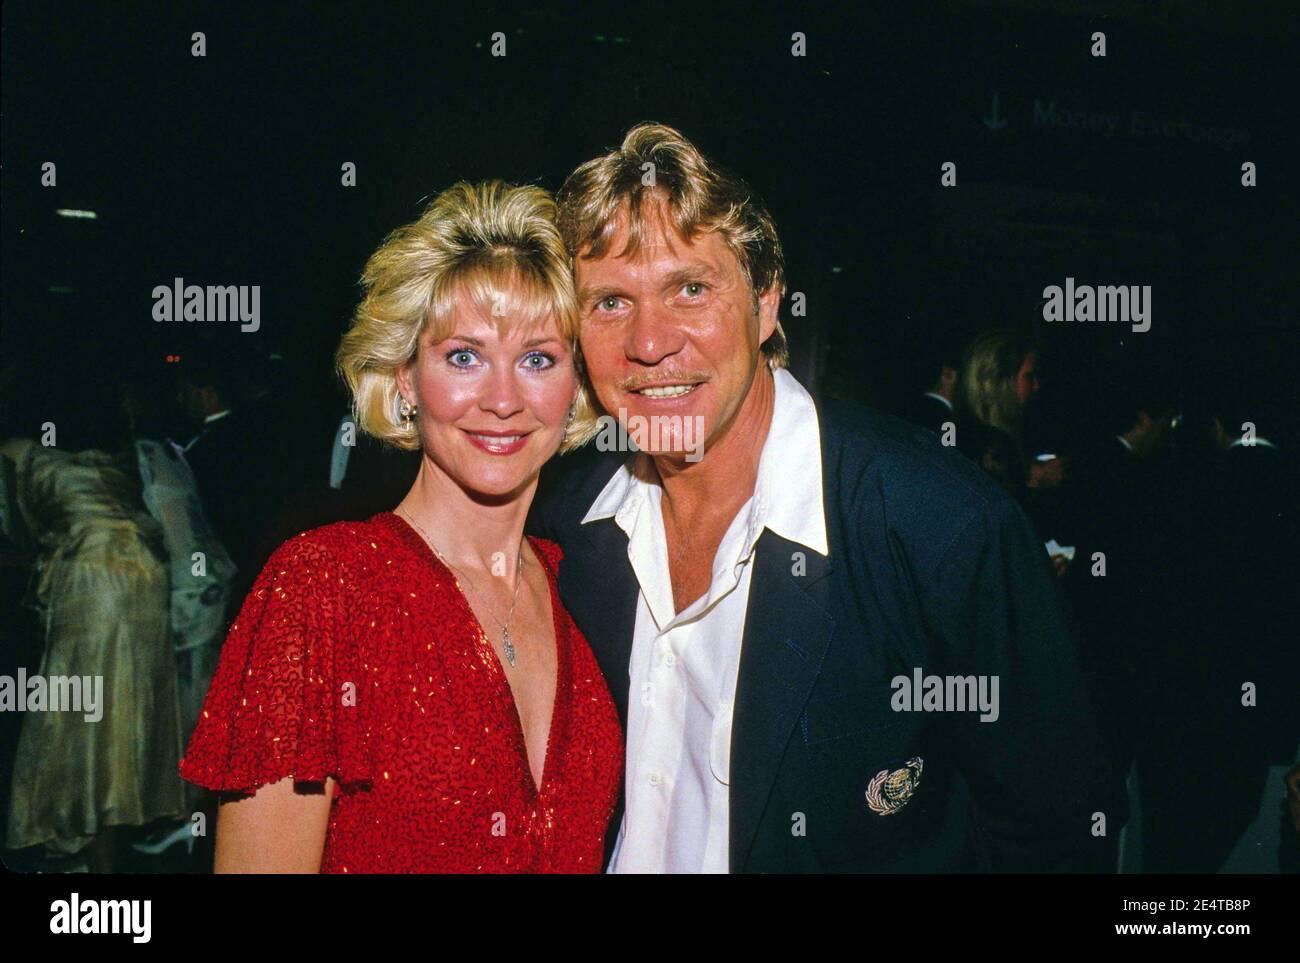 Dee Wallace y Christopher Stone 1987 crédito: Ralph Domínguez/MediaPunch Foto de stock